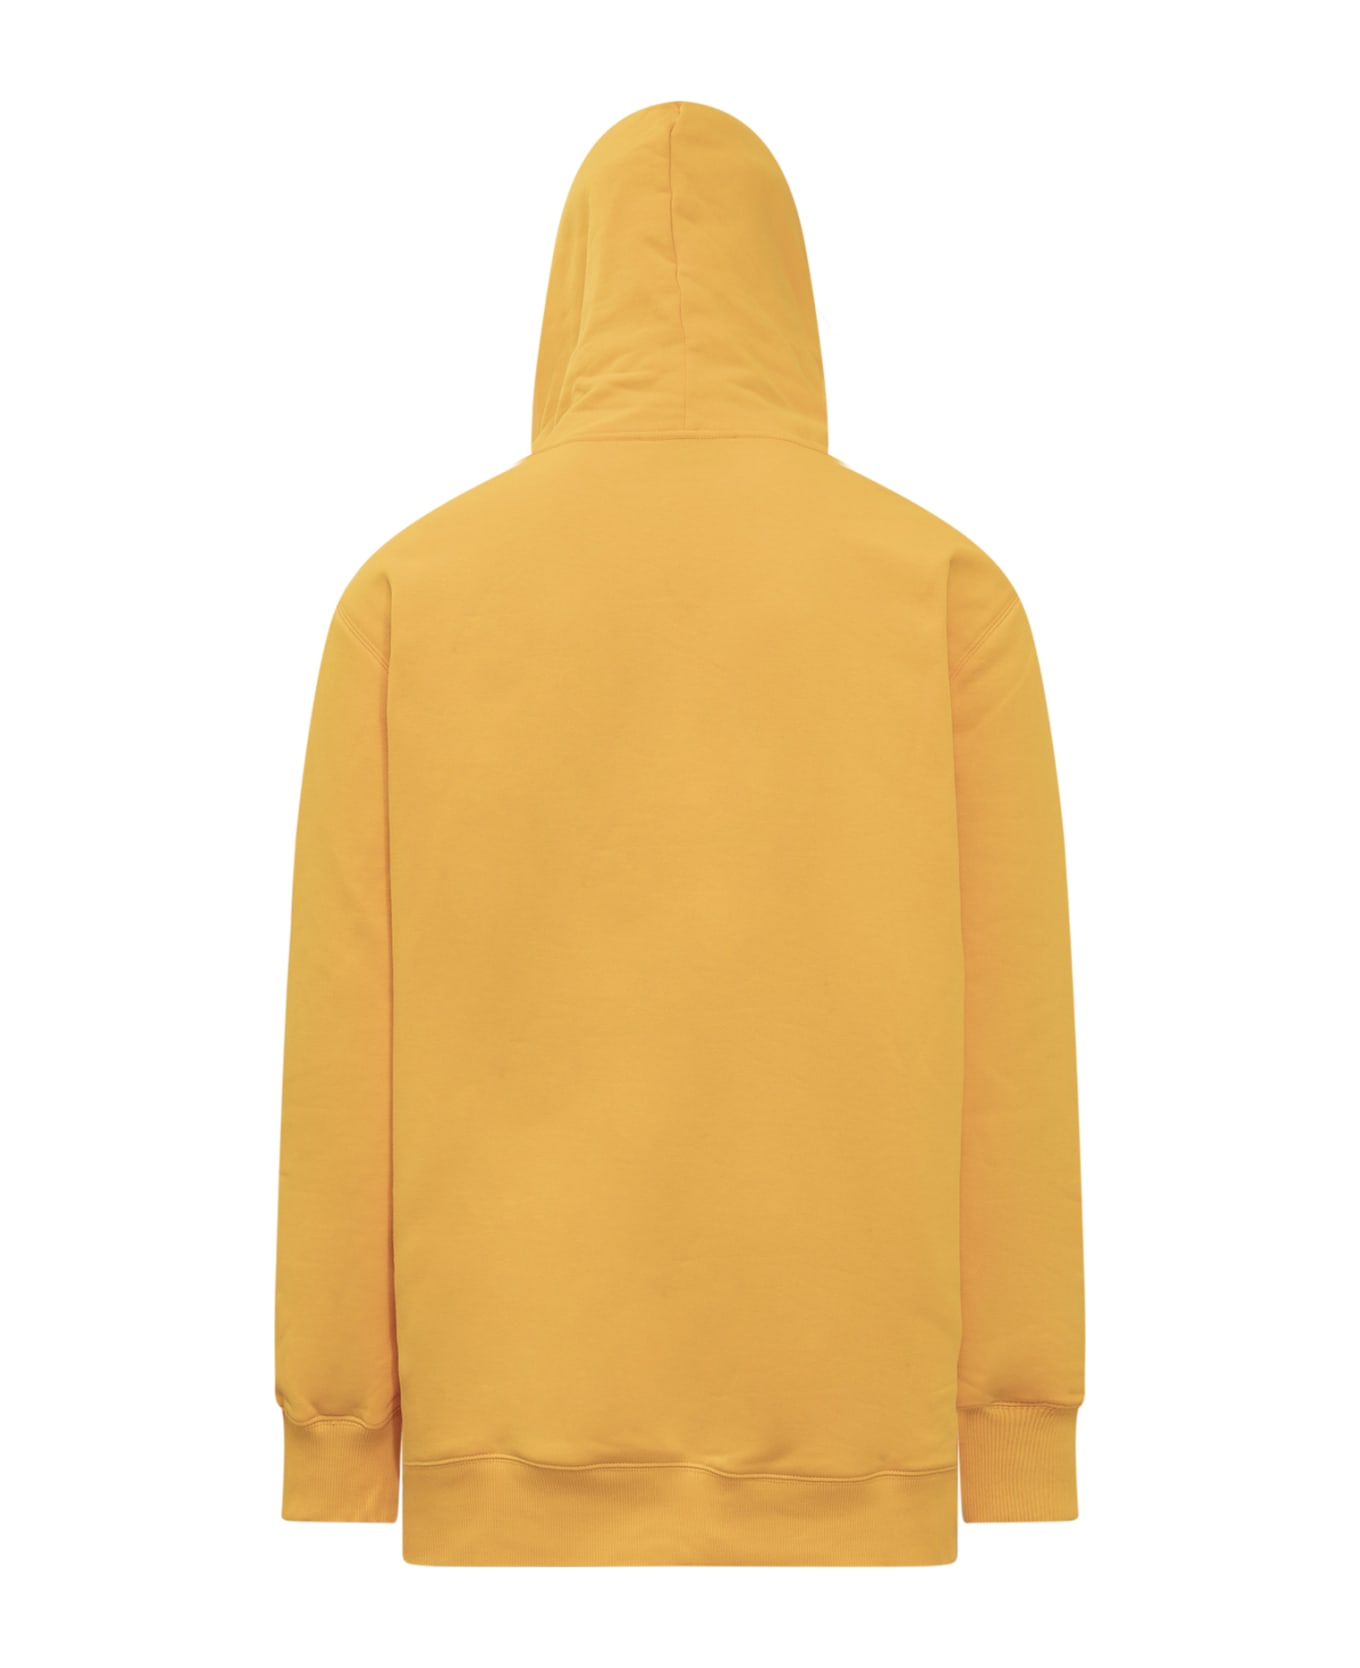 Lanvin Curb Over Hoodie - SUNFLOWER